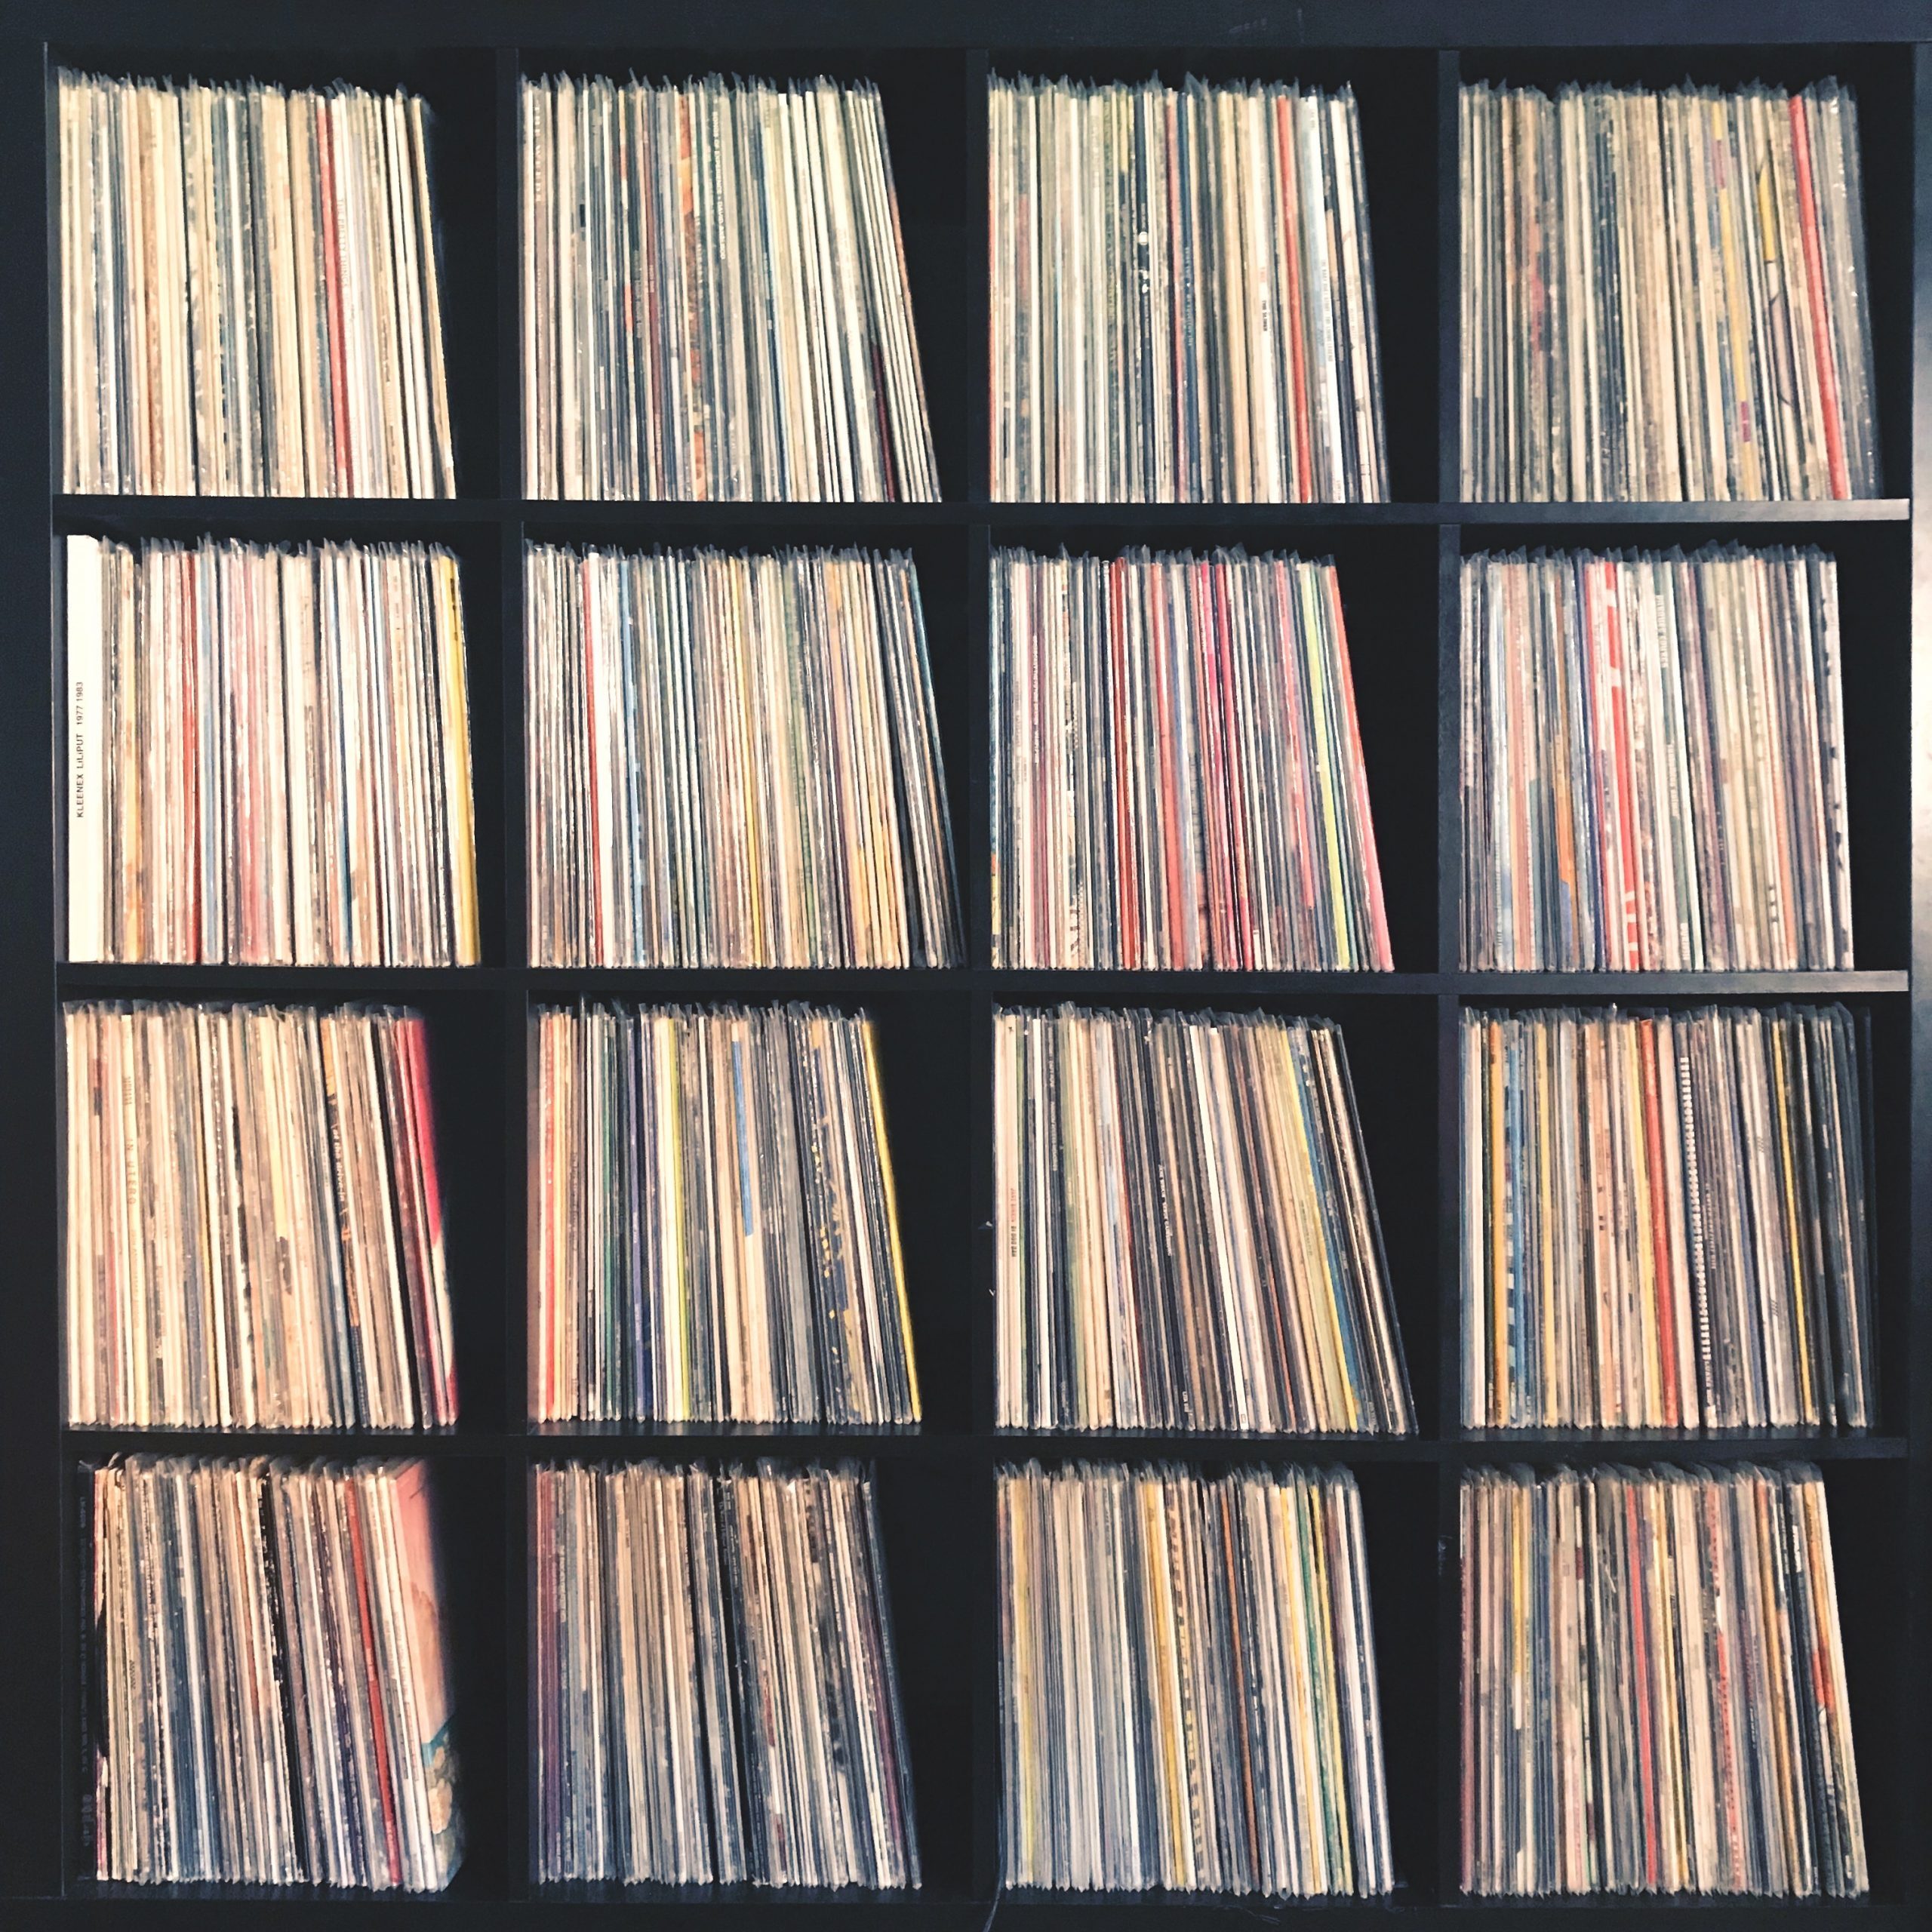 Spin Me Round: Why Vinyl is Better Than Digital for Birds